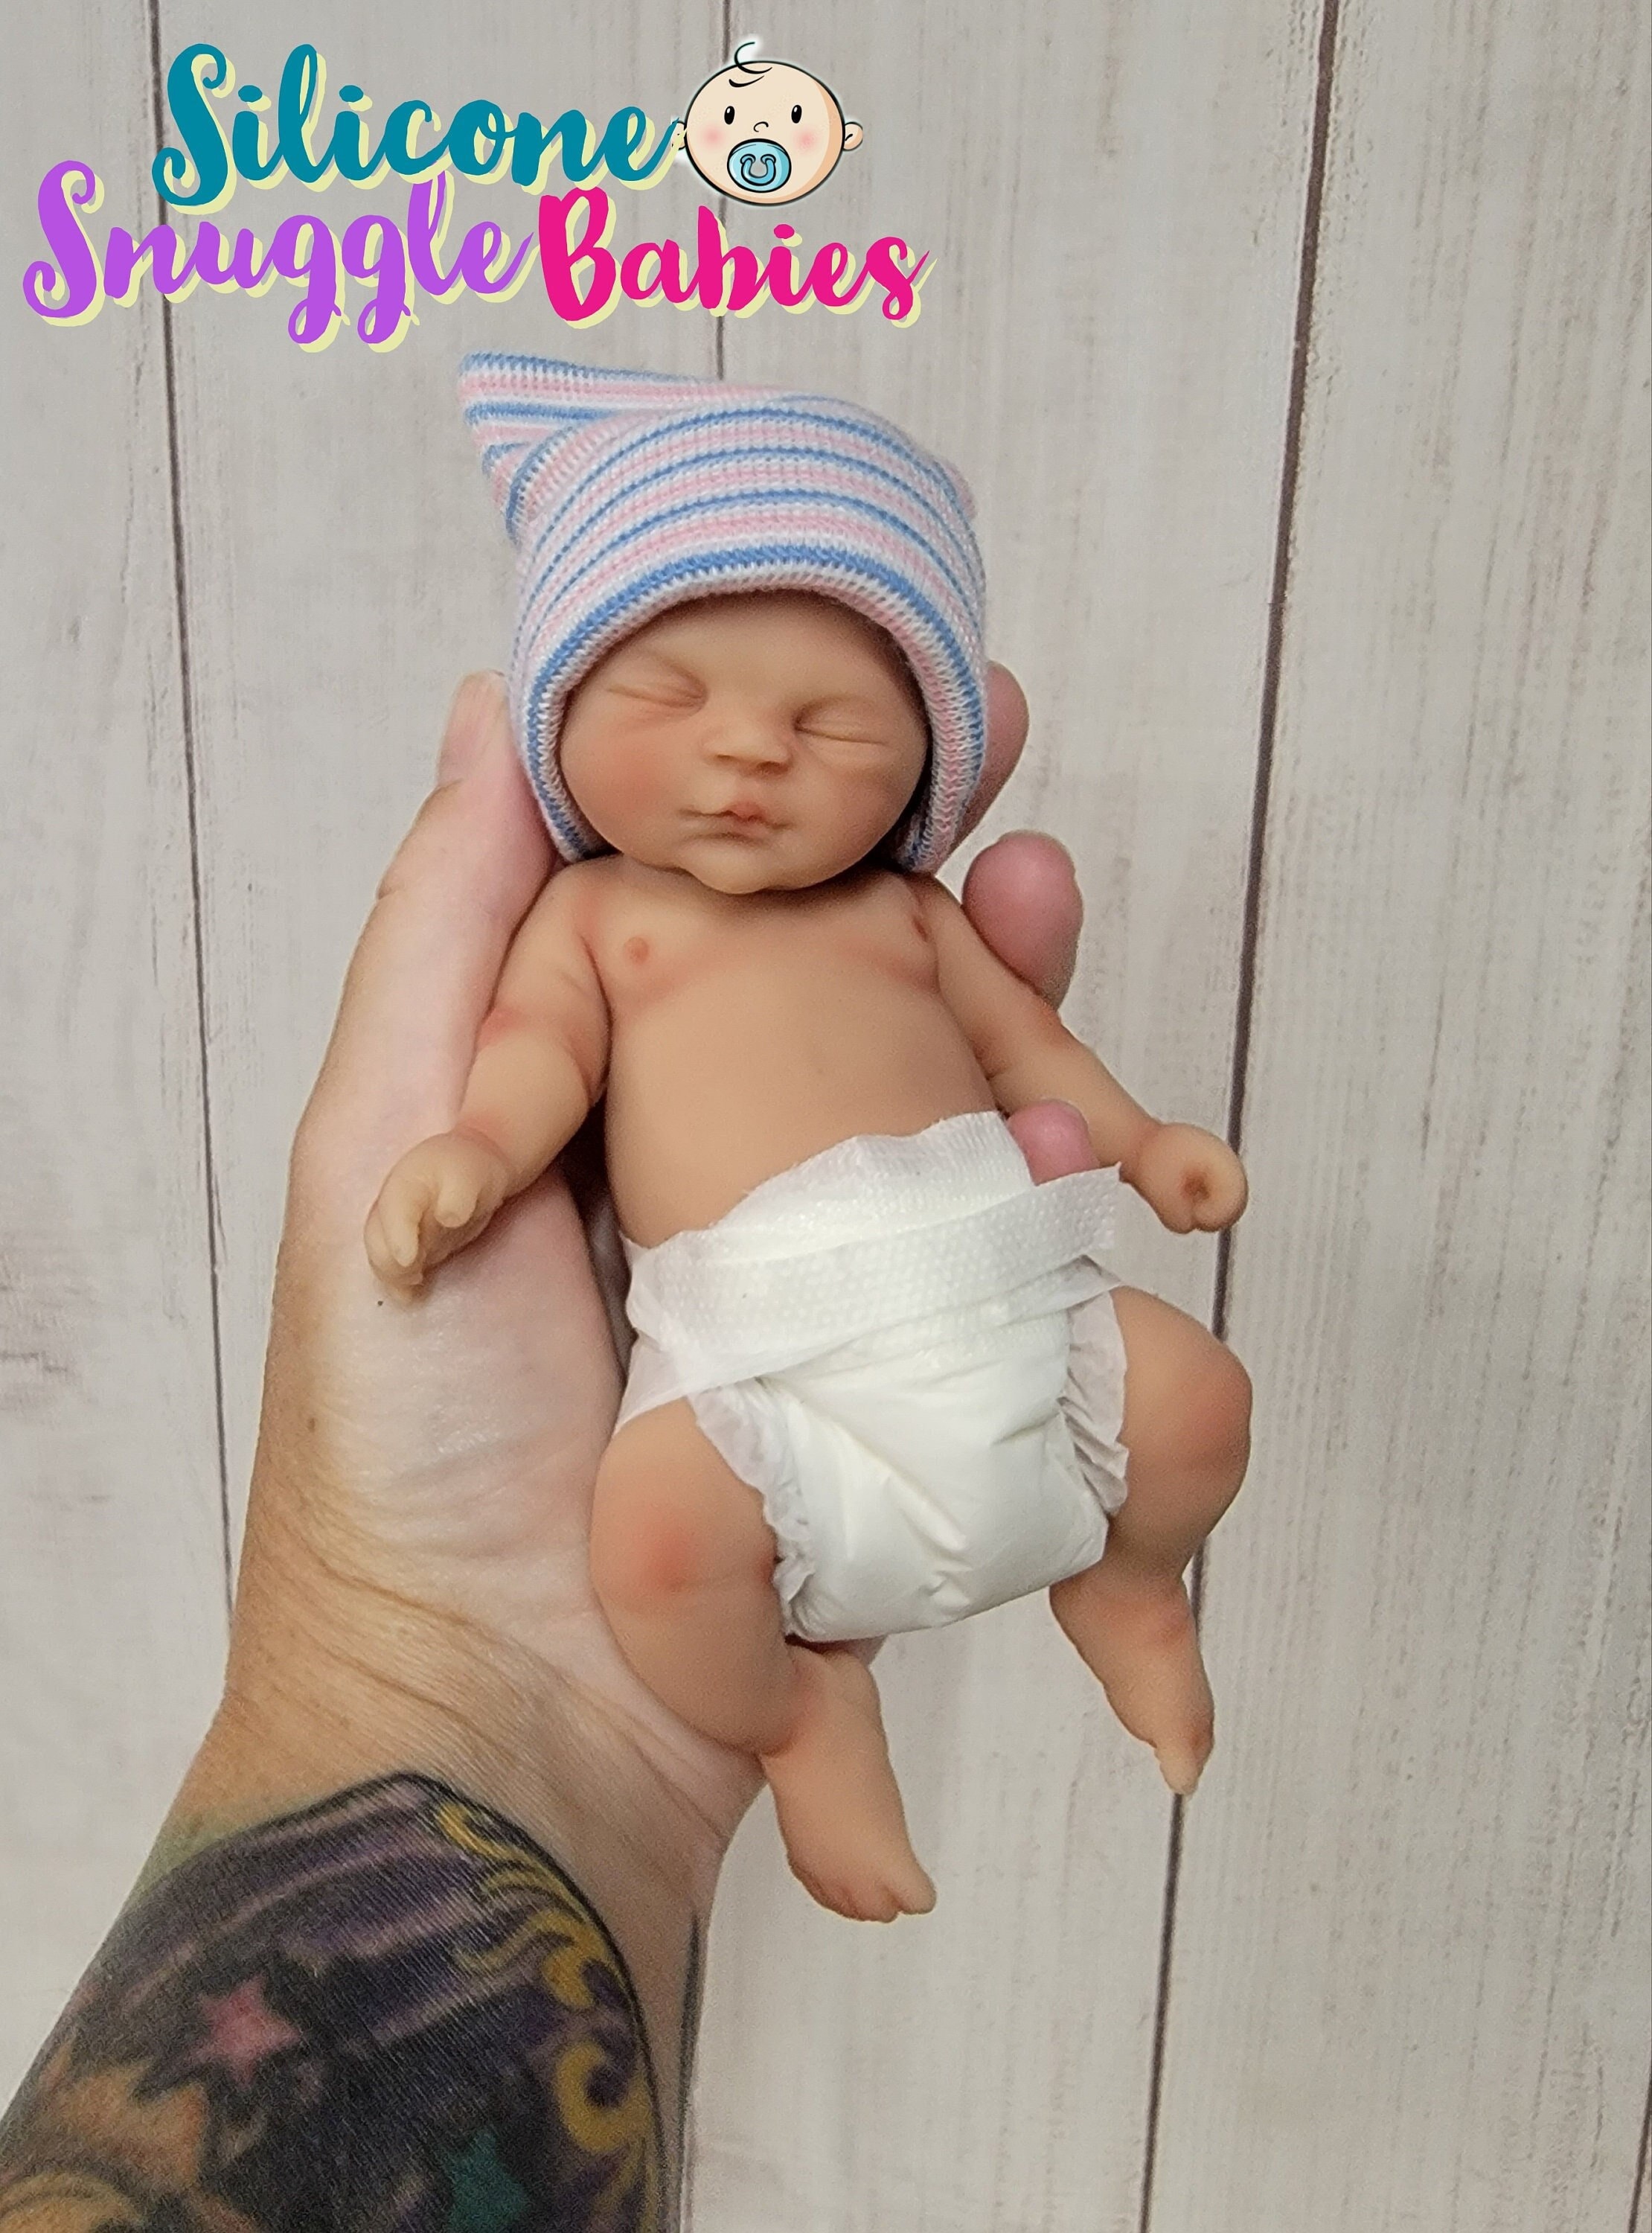 Angelbaby Cute Life Like 20 Inch Reborn Baby Doll Black Boy Sleeping,  Realistic New Born African American Baby in Silicone Biracial Doll with  Clothes